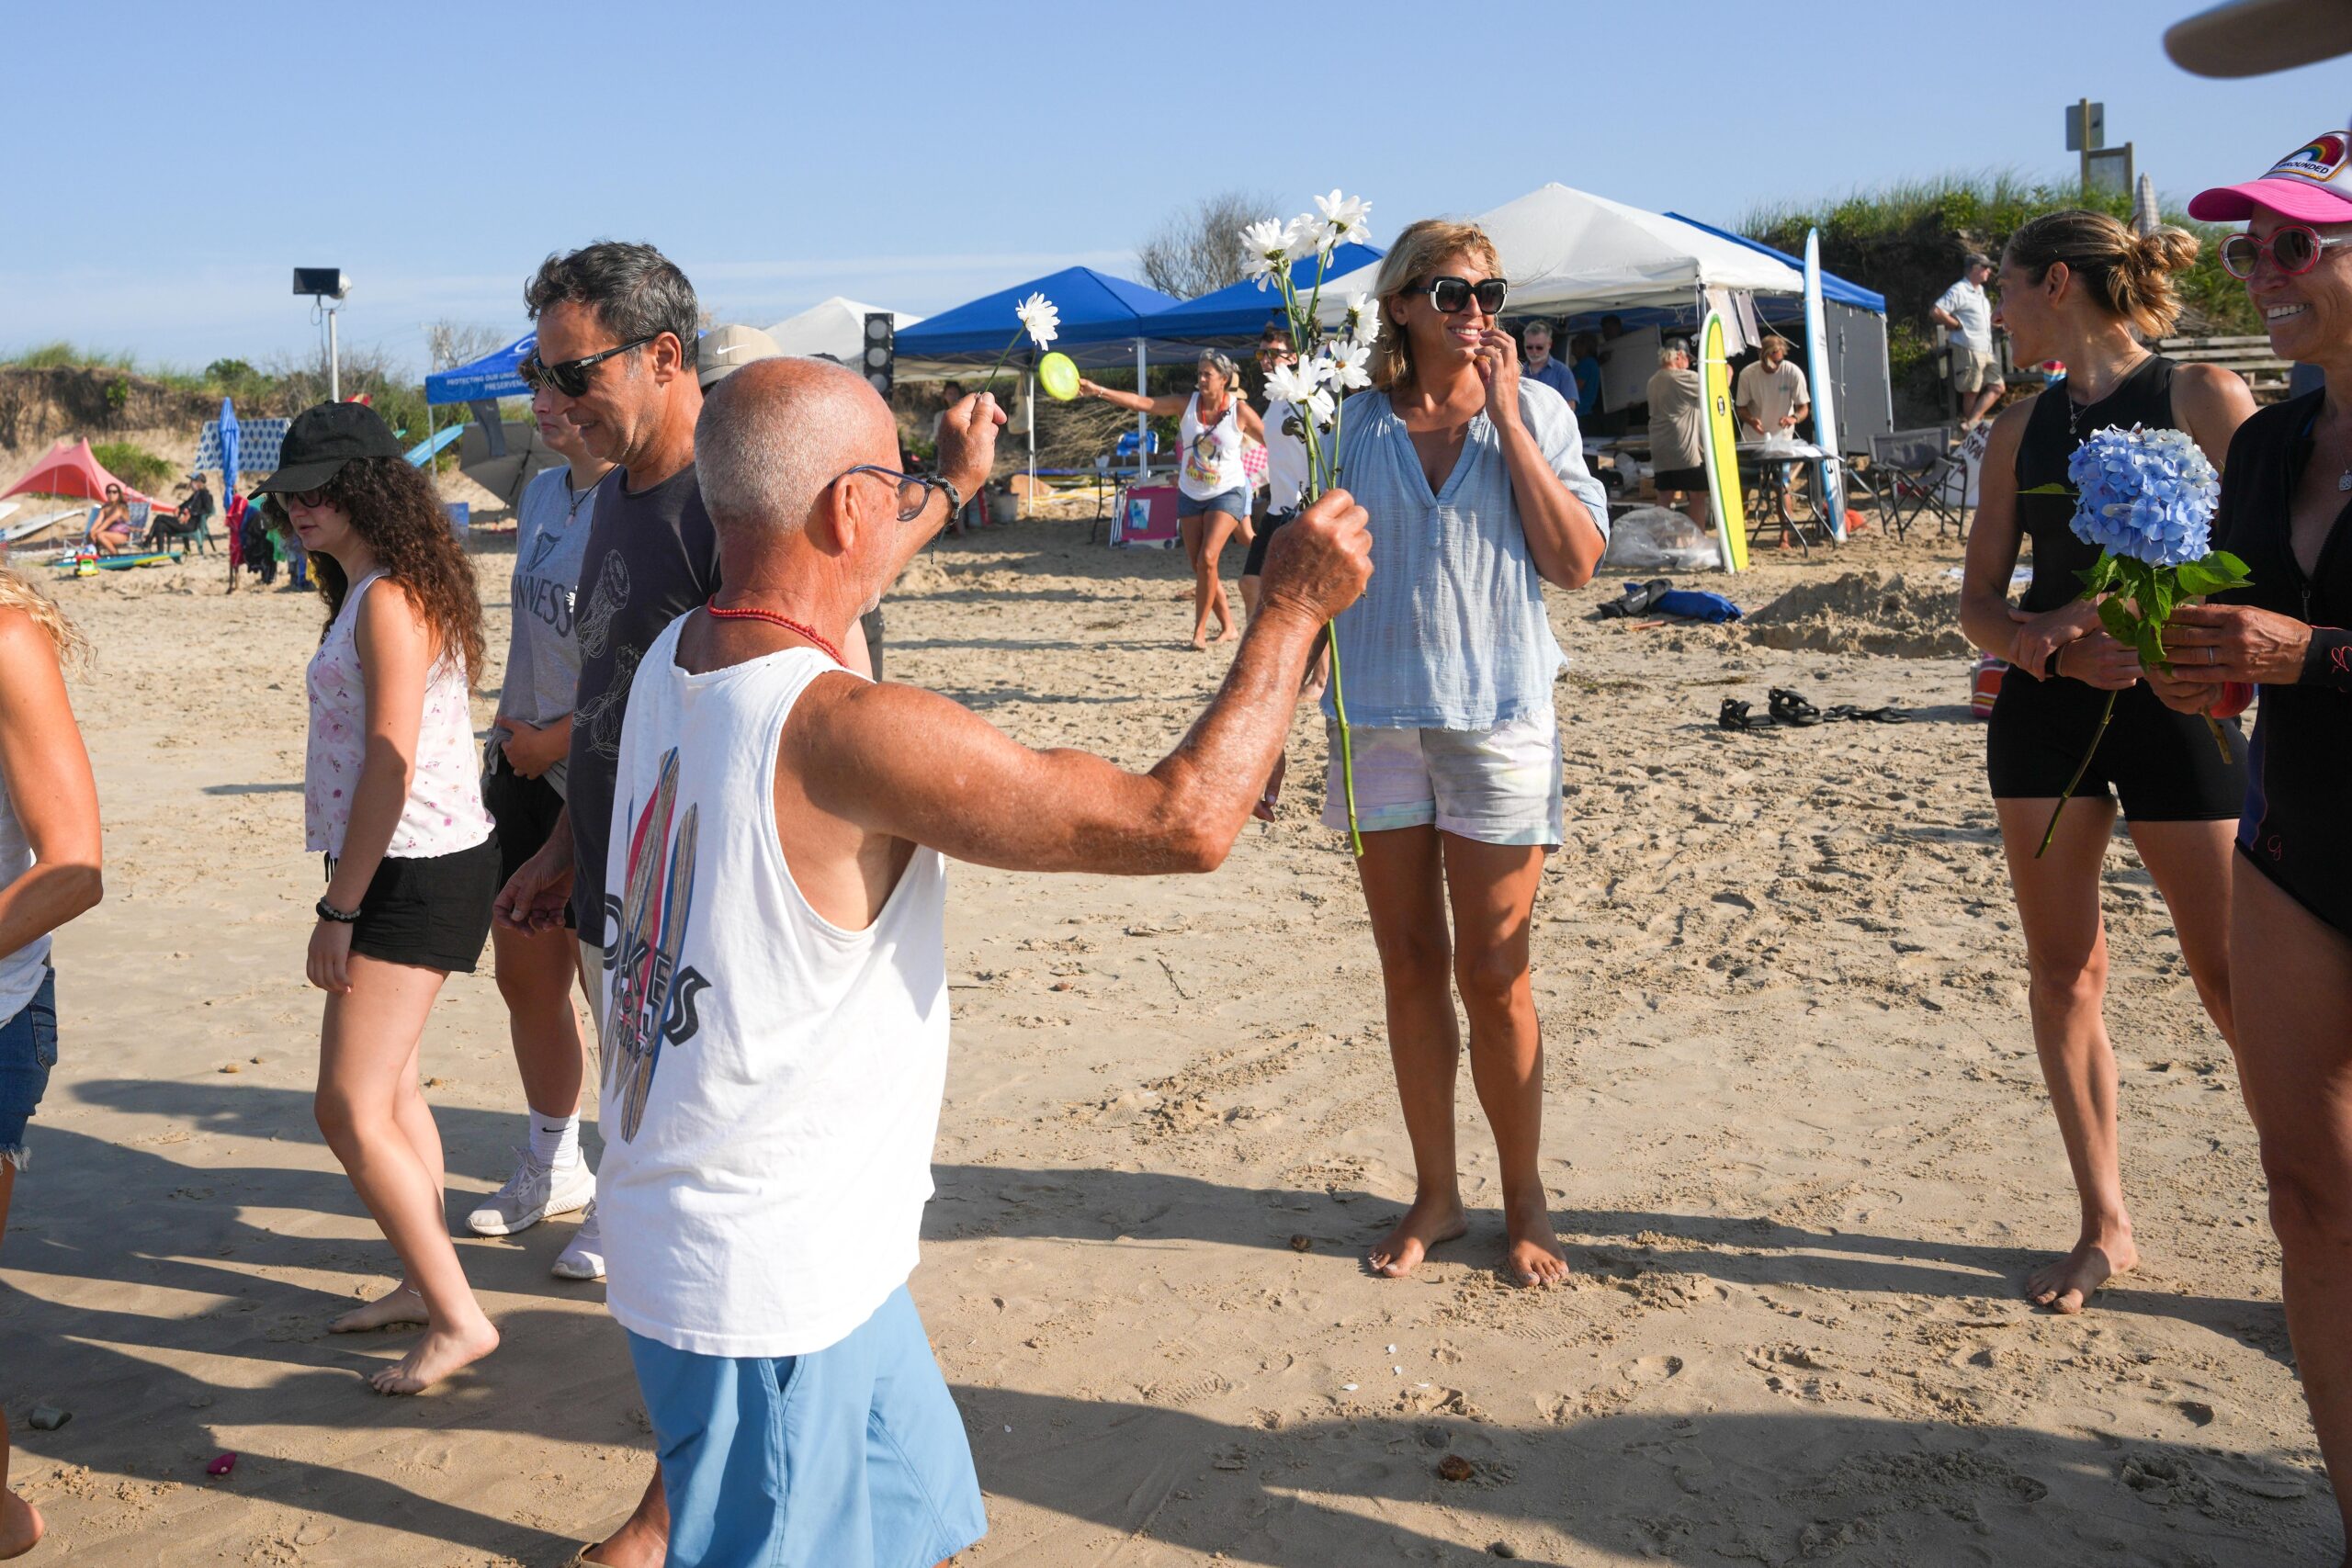 Roger Feit hands out flowers for the memorial prior to the 24th annual Rell Sunn Memorial Surf Contest at Ditch Plains on Saturday morning.    RON ESPOSITO